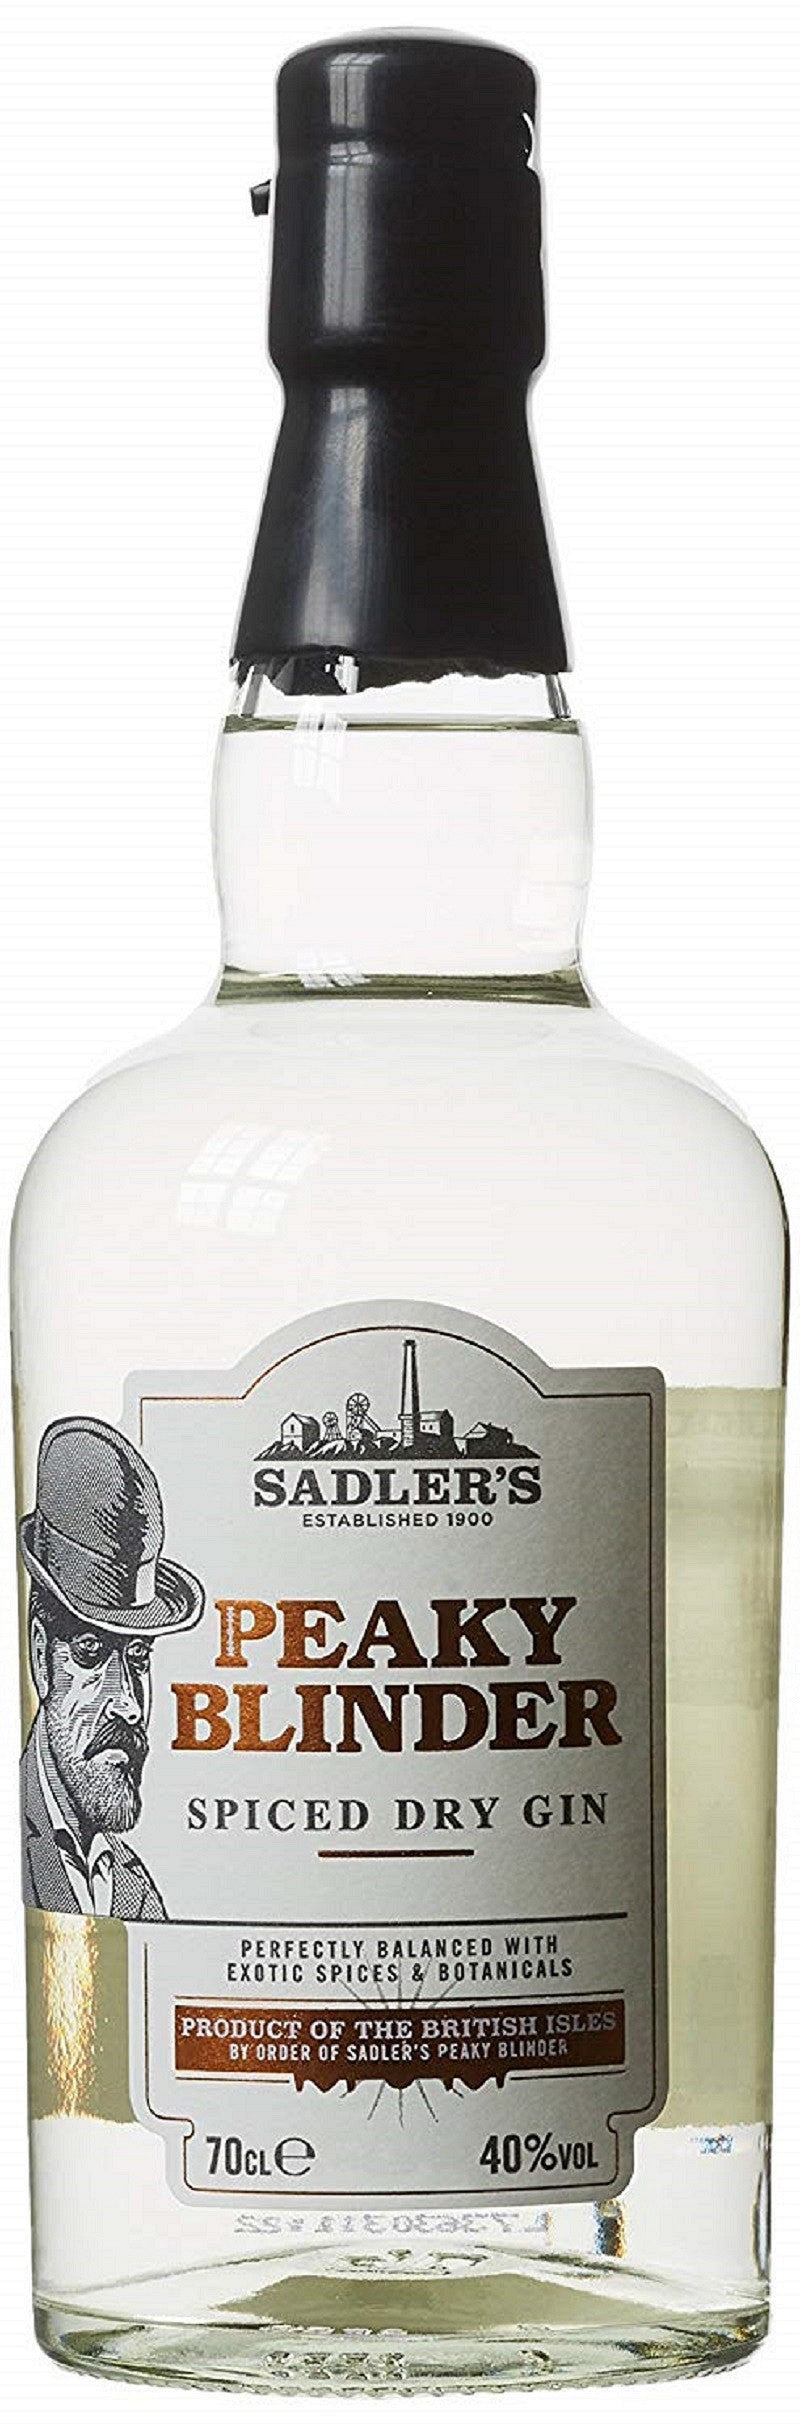 peaky blinder spiced dry gin | english gin